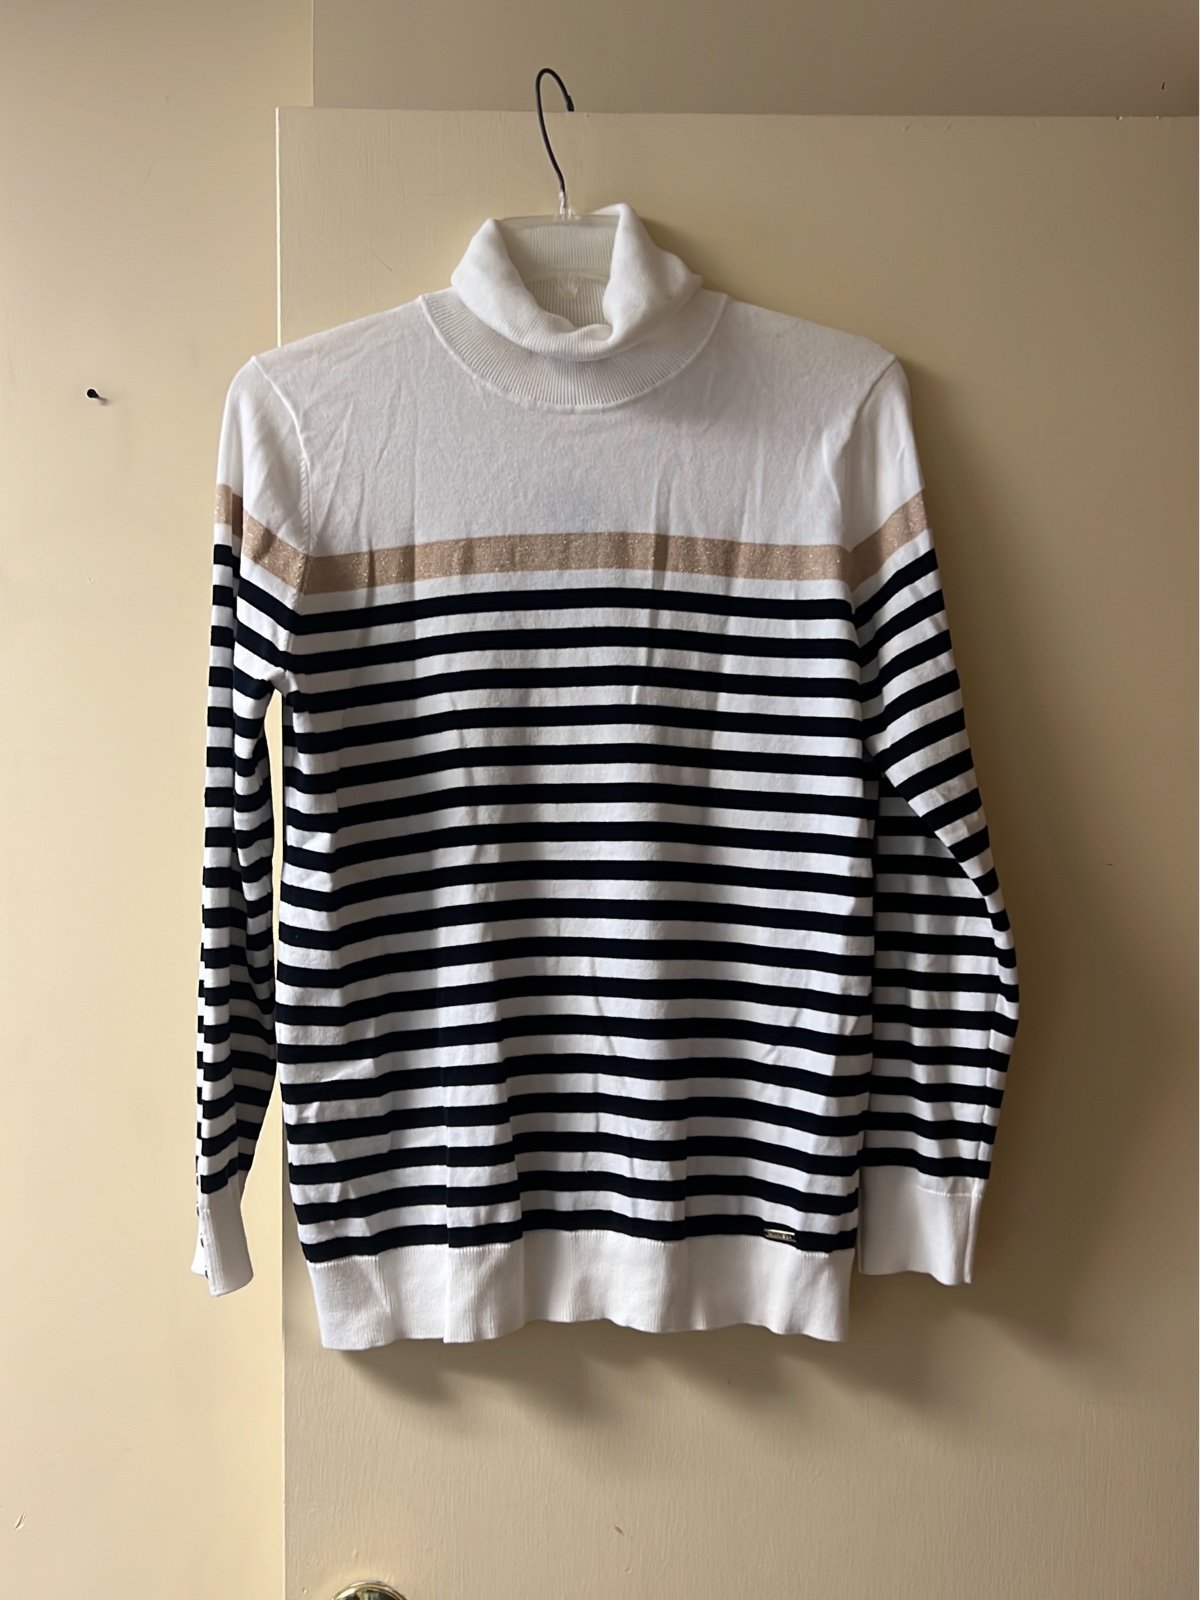 save up to 70% Tommy Hilfiger Sweater XL MON5pD920 Grea